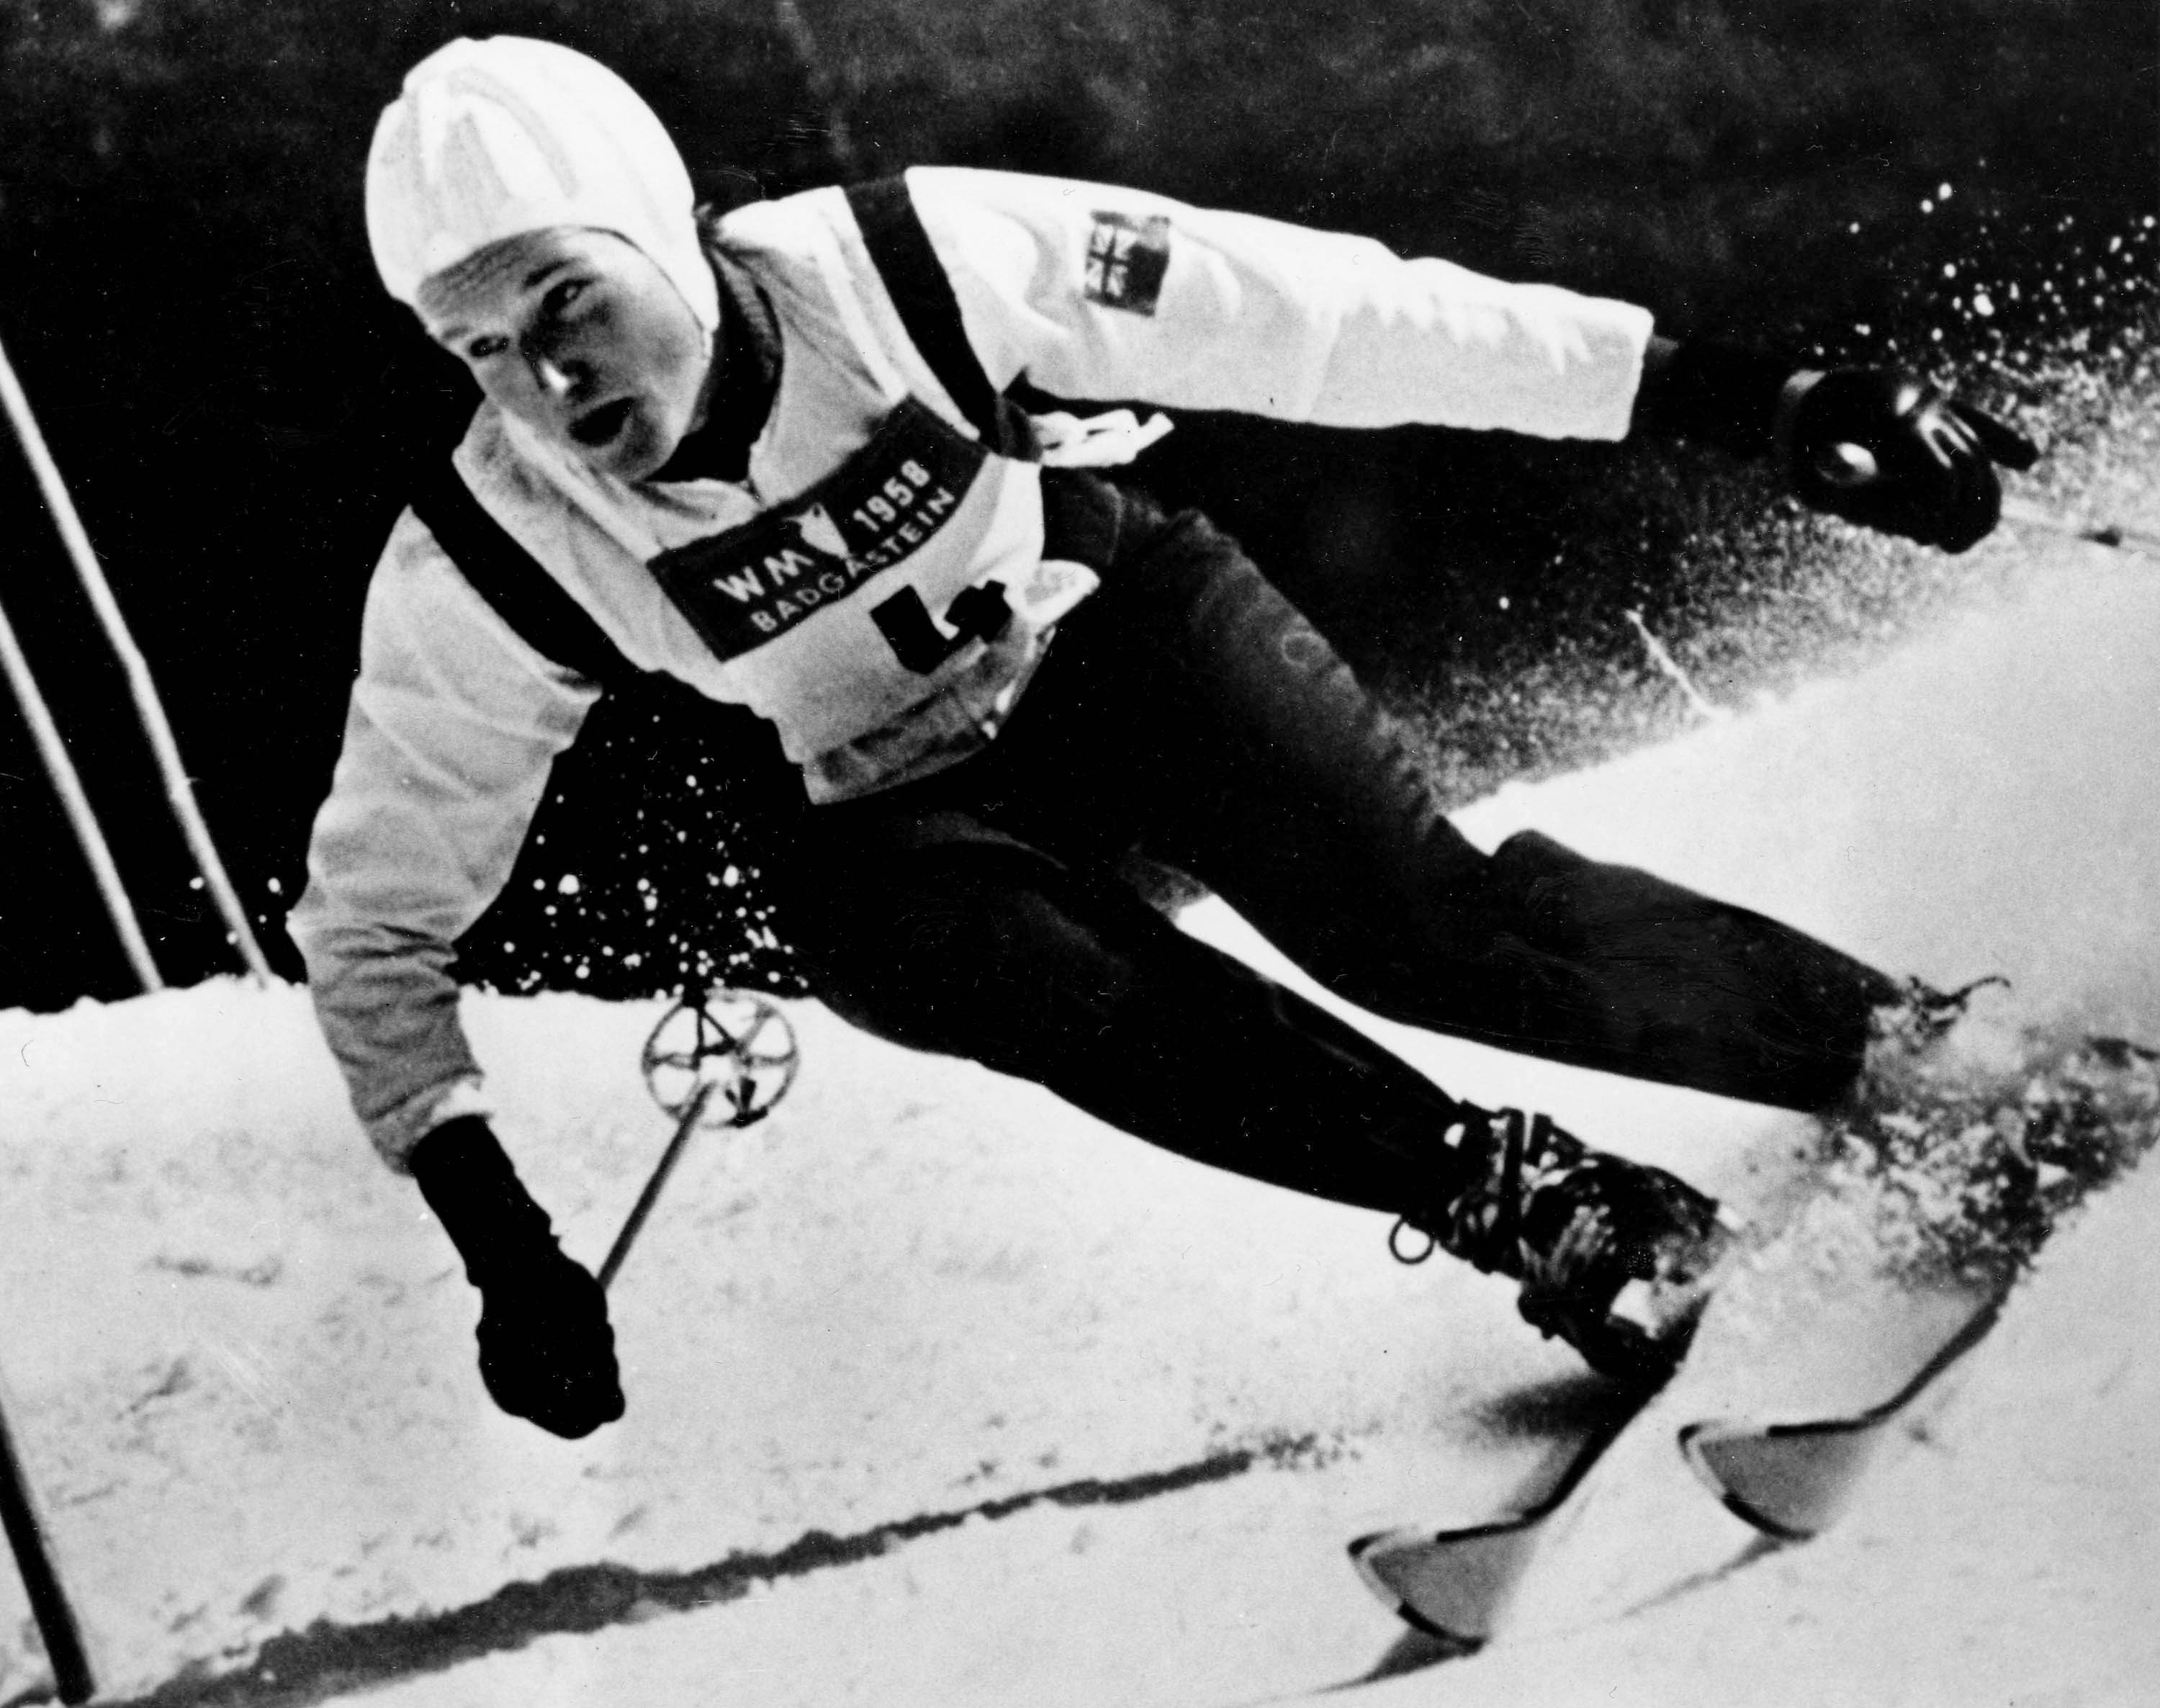 Canada's Lucile Wheeler participates in an alpine ski event at the 1958 World Championships. (CP Photo/COC)